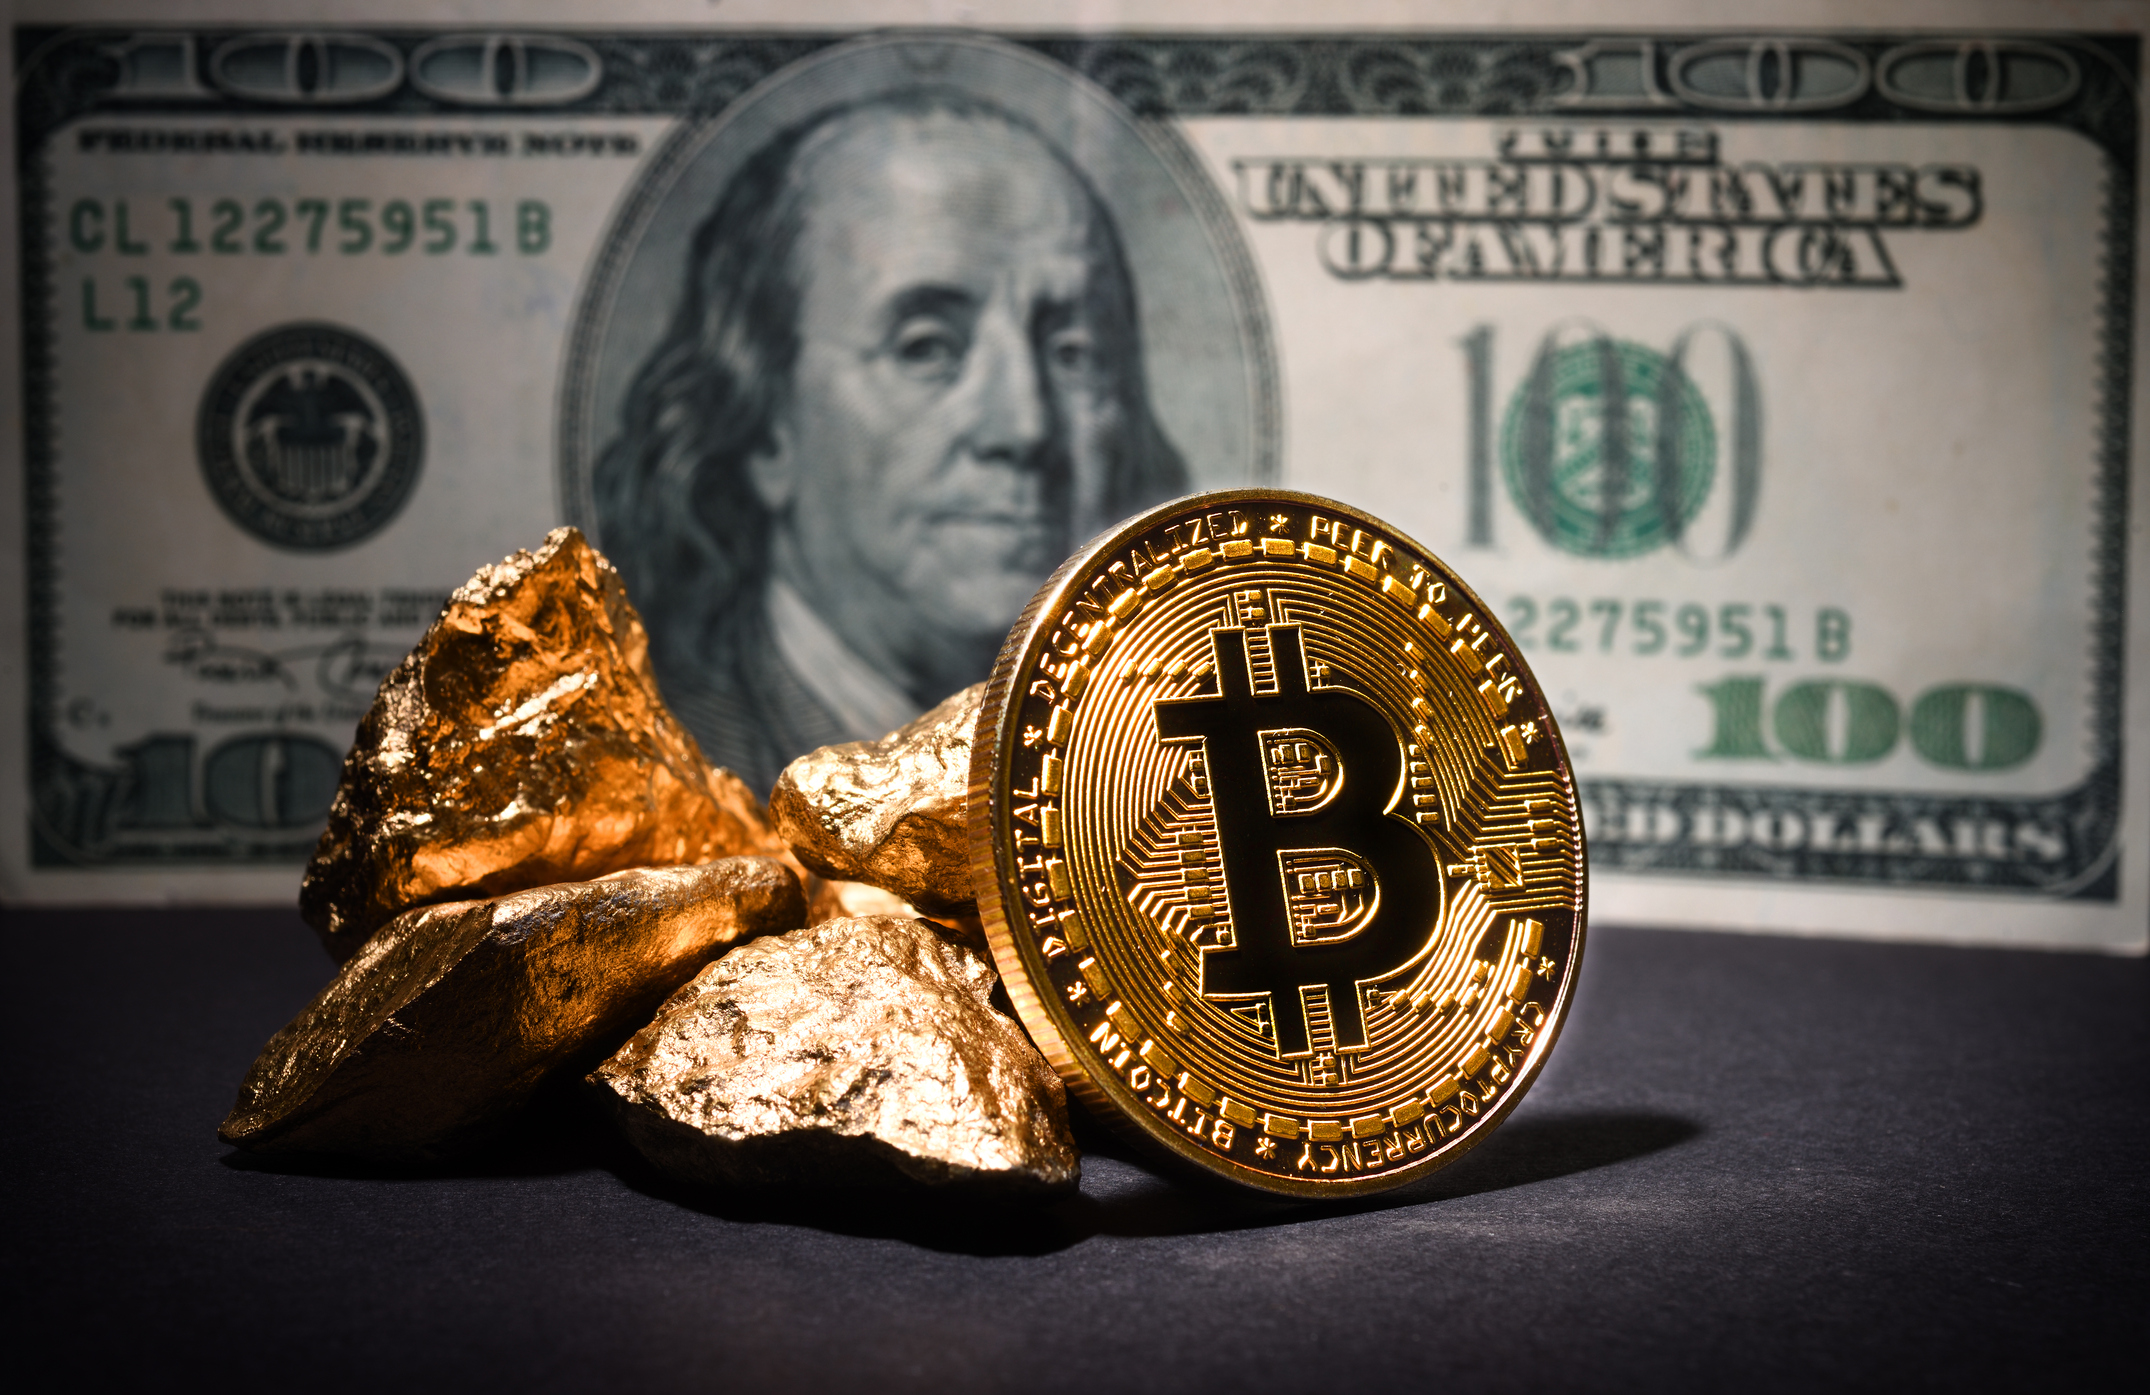 Bitcoin and DXY compete for global financial dominance